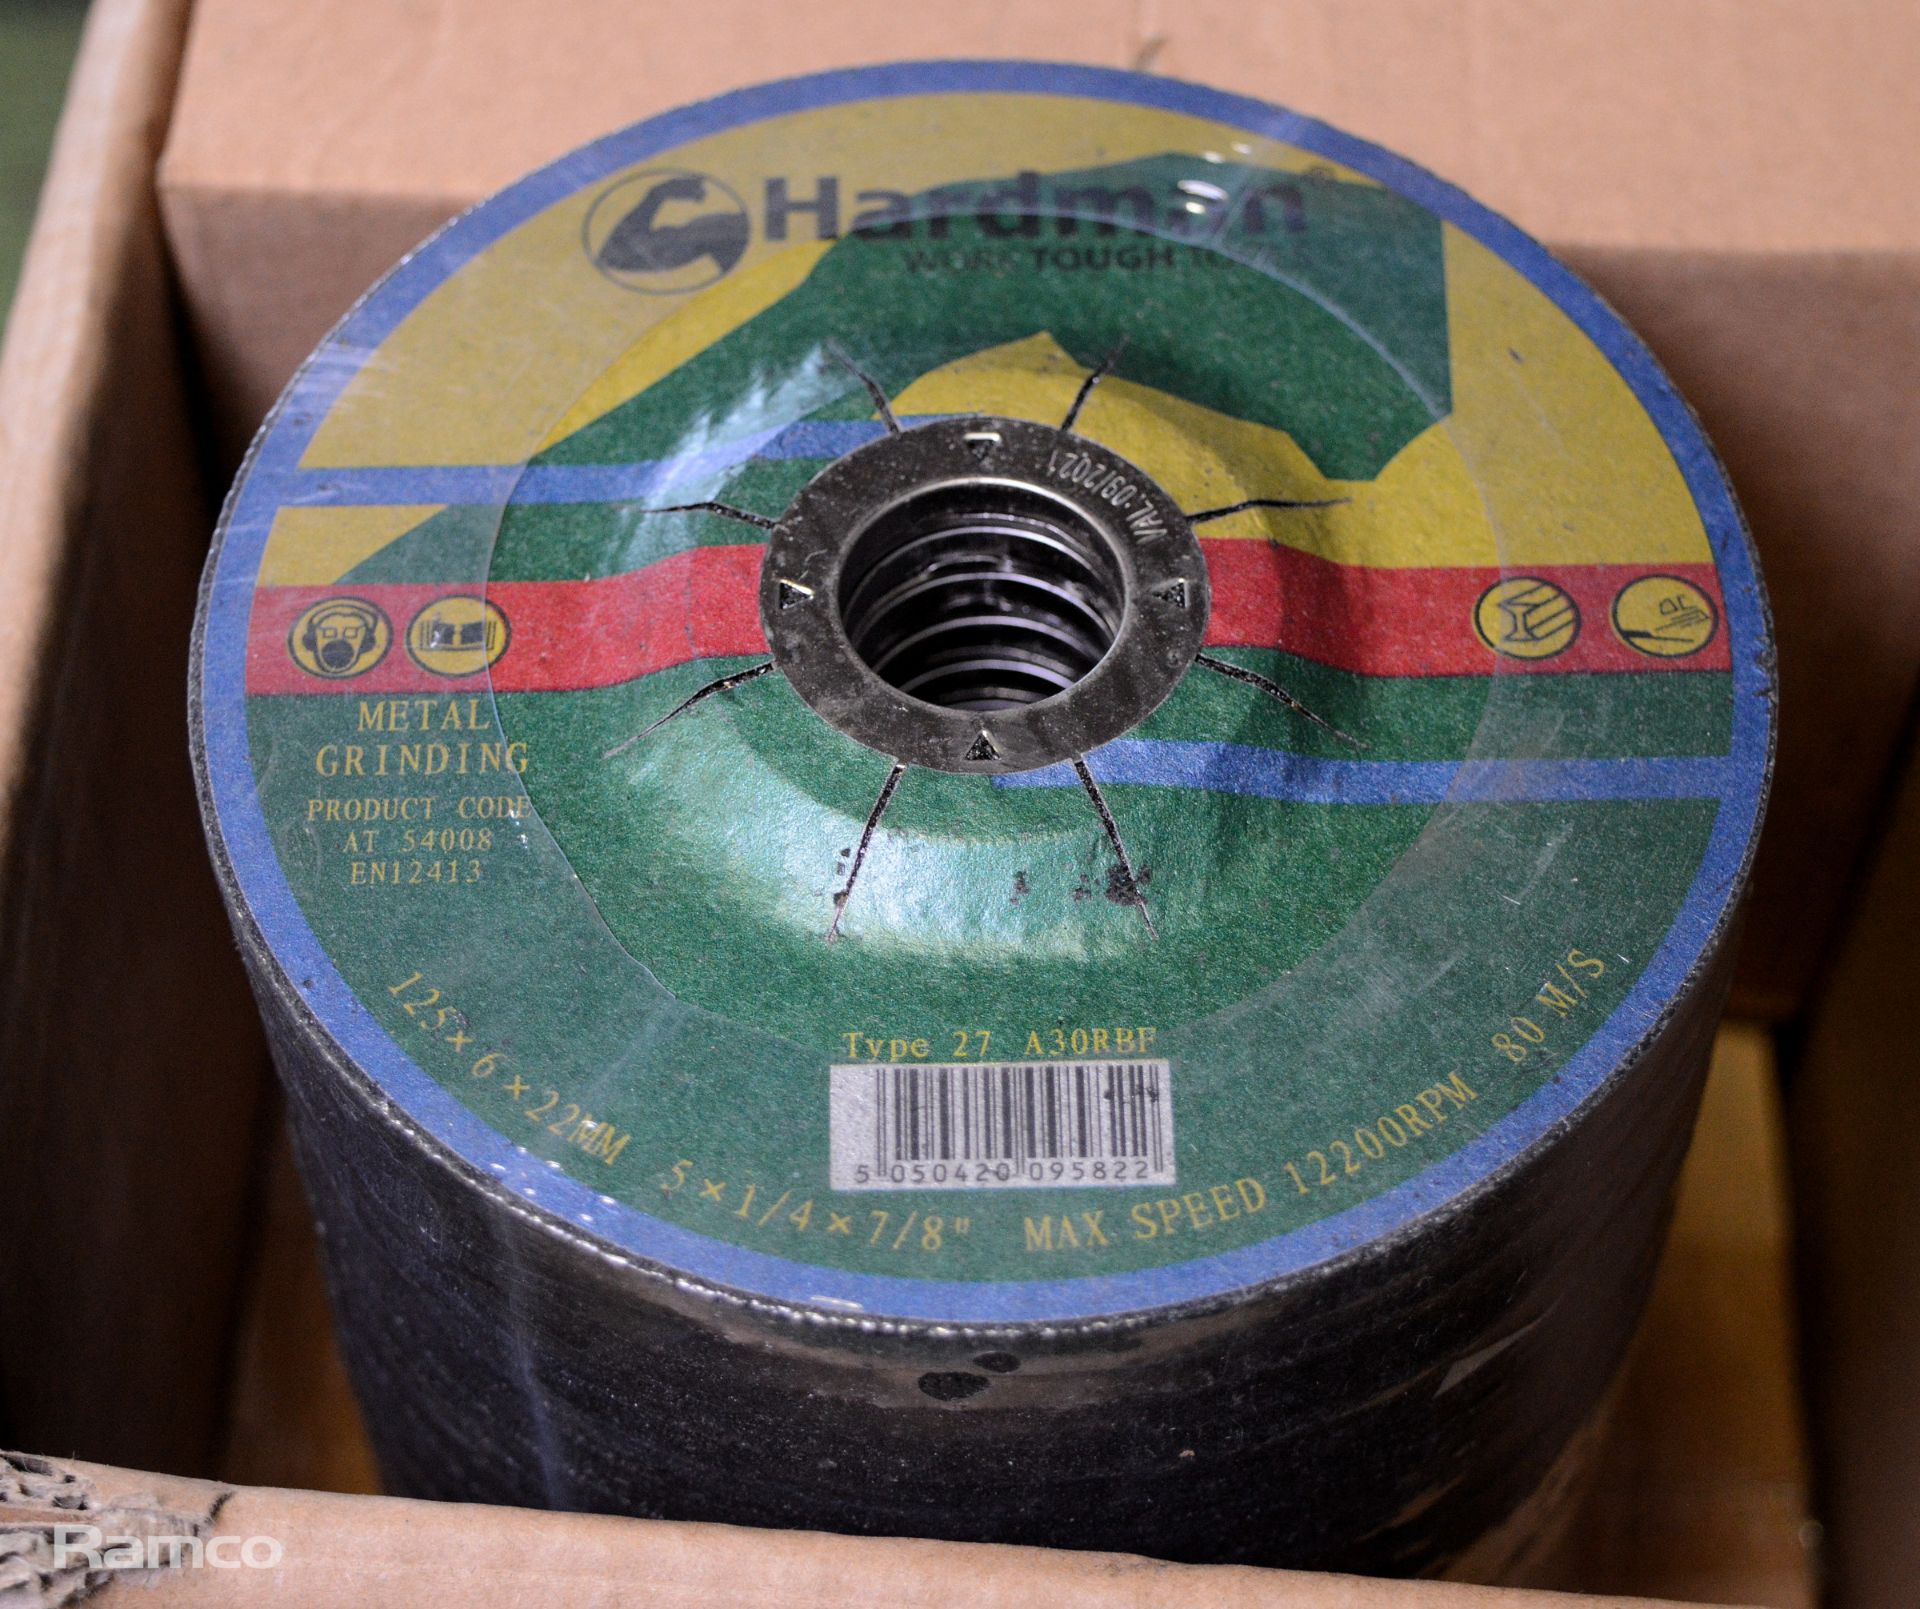 5 inch metal grinding discs - approx 100 - Image 2 of 3